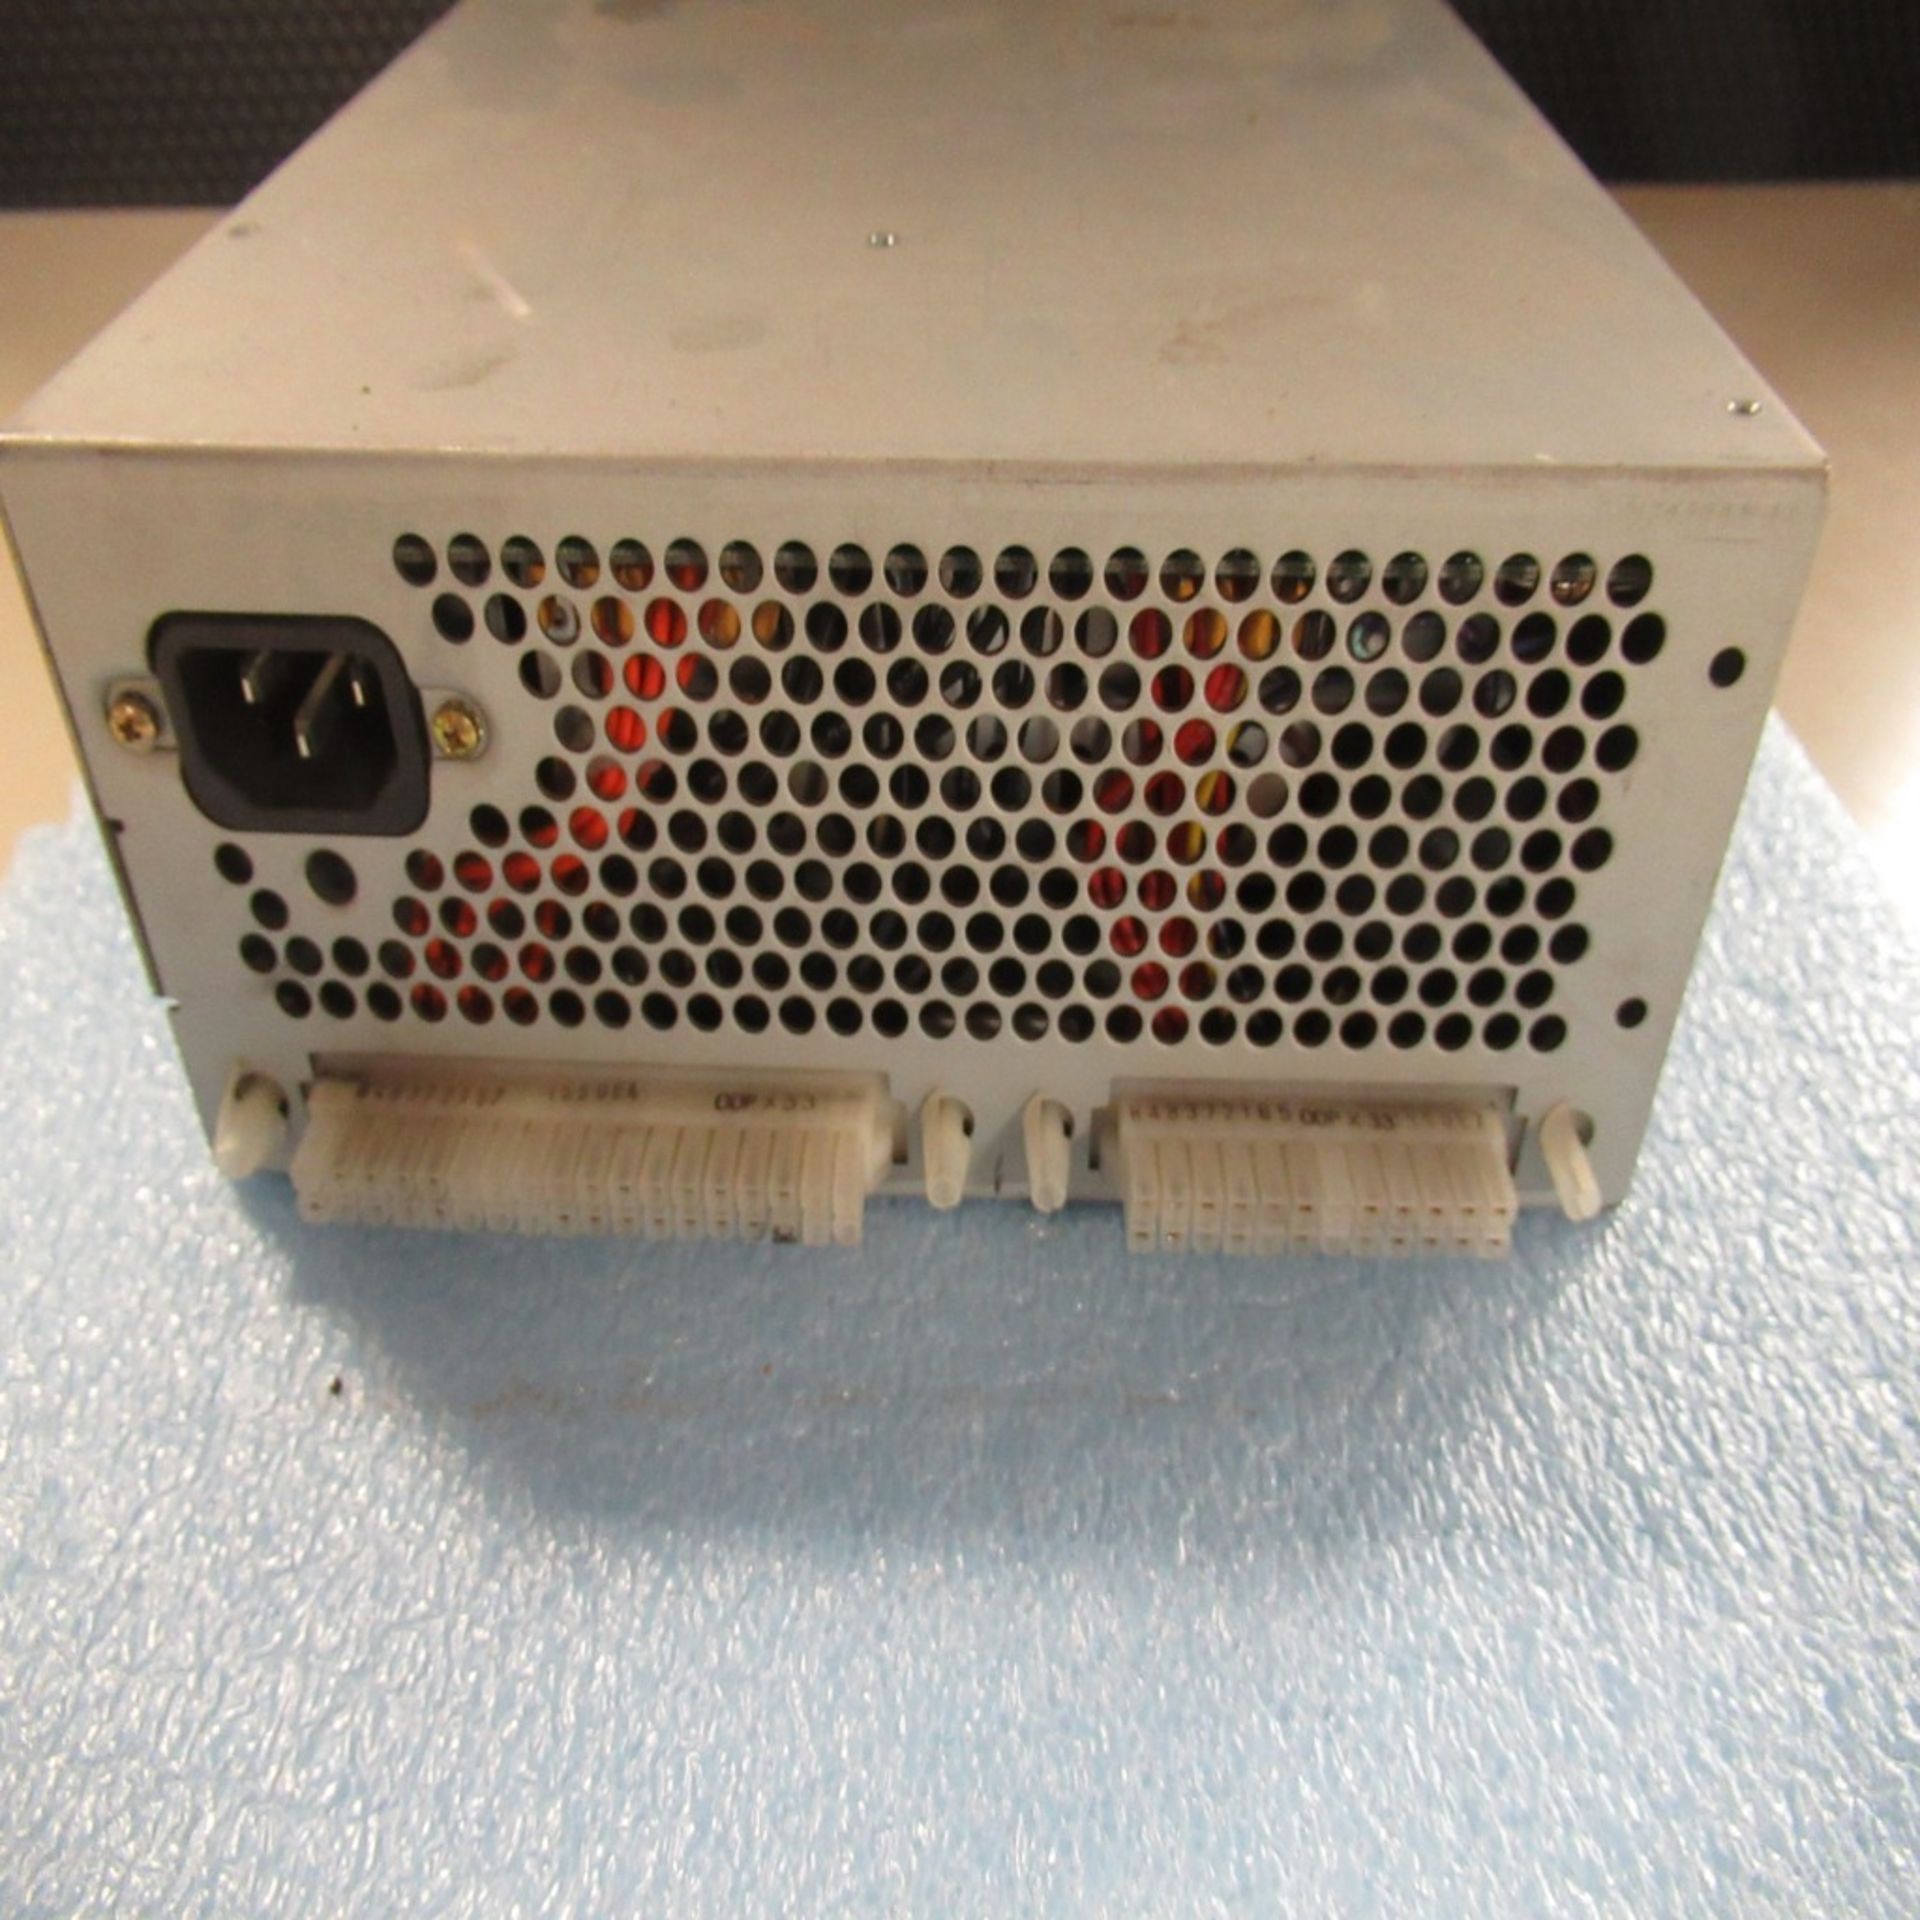 PHOTON SNAP SHOT MODEL 6000 *POWERS ON* NO SCREEN DISPLAY; FARNELL AP20-80 REGULATED POWER SUPPLY * - Image 208 of 222